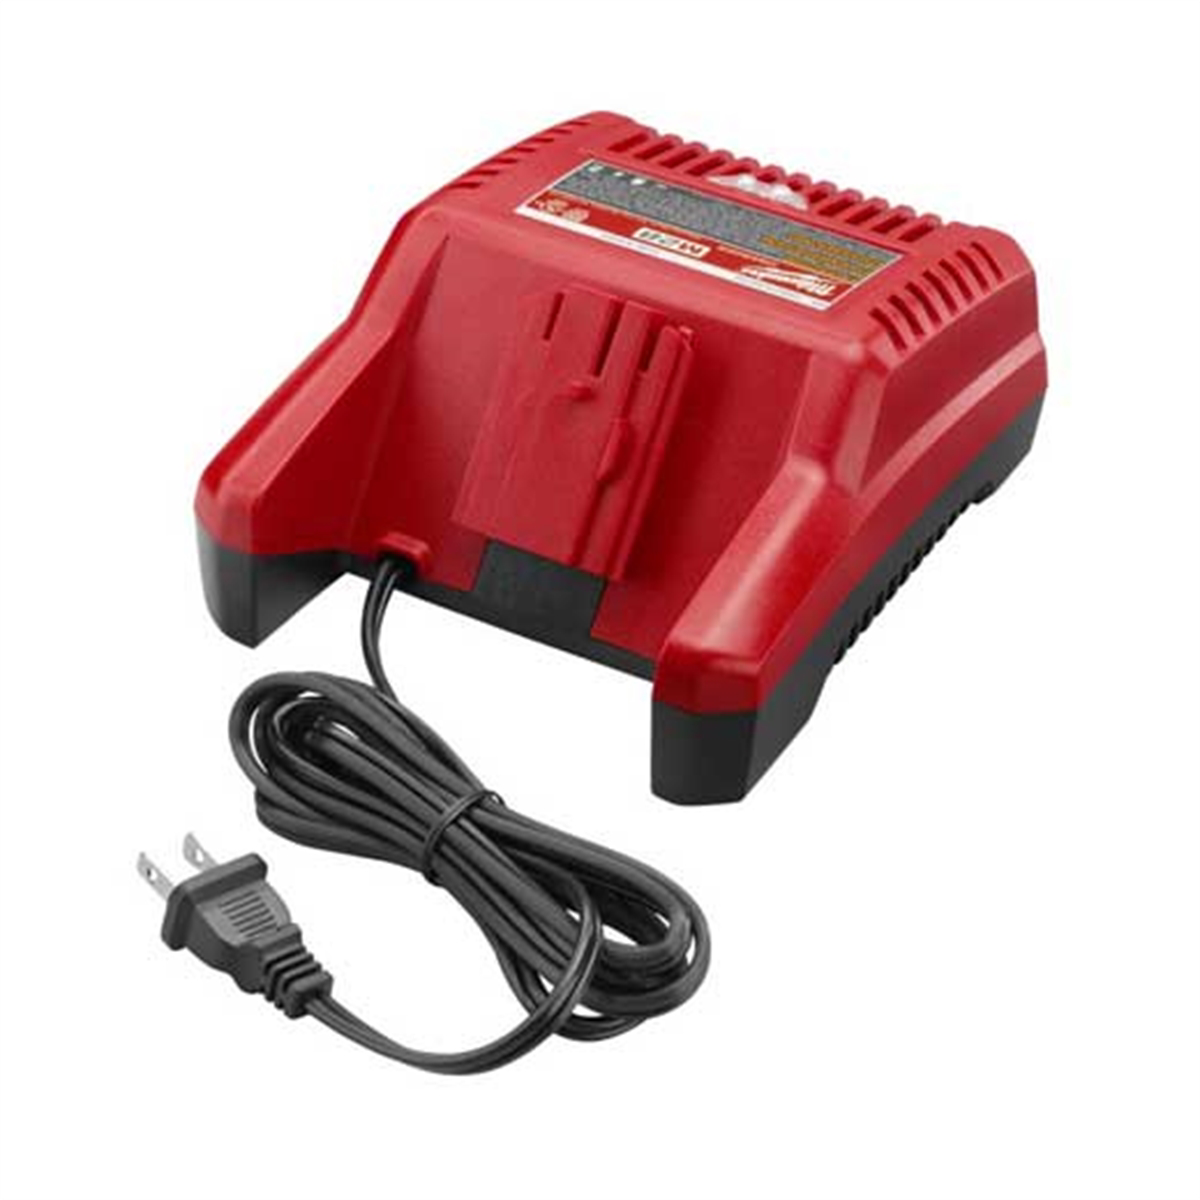 M28 28-Volt Lithium-Ion 1-Hour Battery Charger